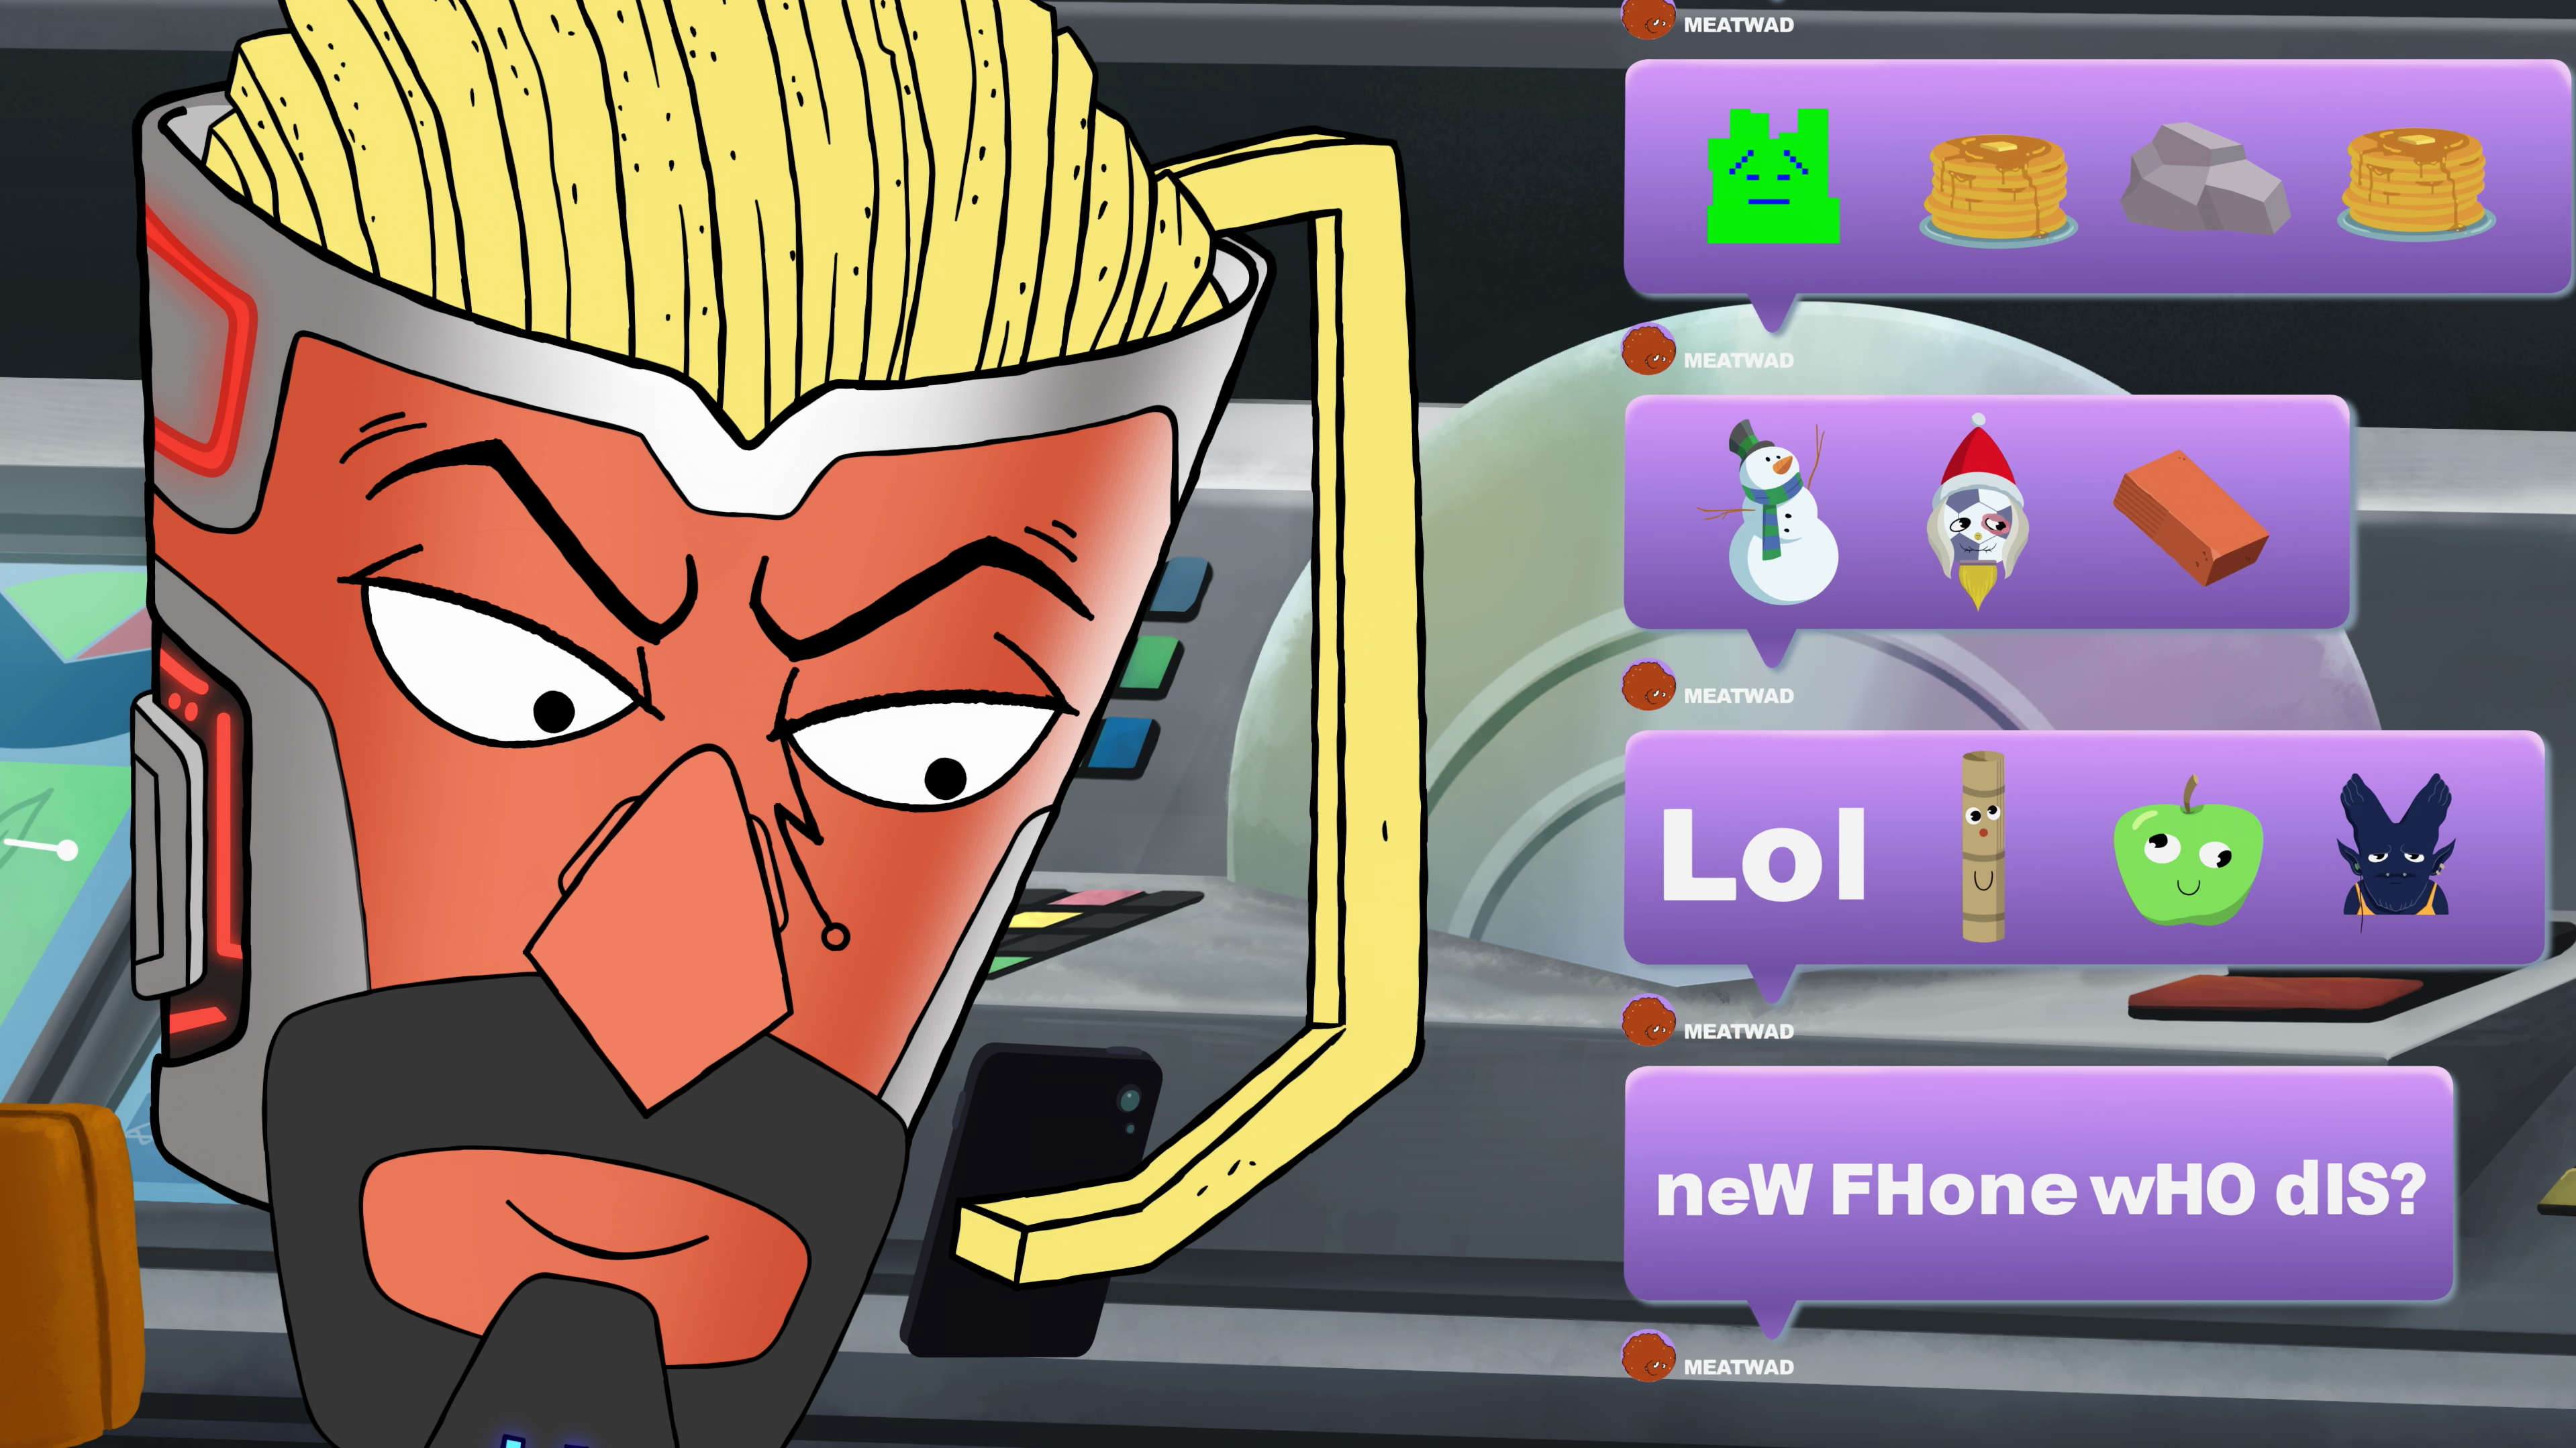 Frylock (Carey Means) receives a few text messages from Meatwad (Dave Willis) Master Shake (Dana Snyder) forms a plan with Frylock (Carey Means) in Aqua Teen Forever: Plantasm (2022) Williams Street via Blu-ray